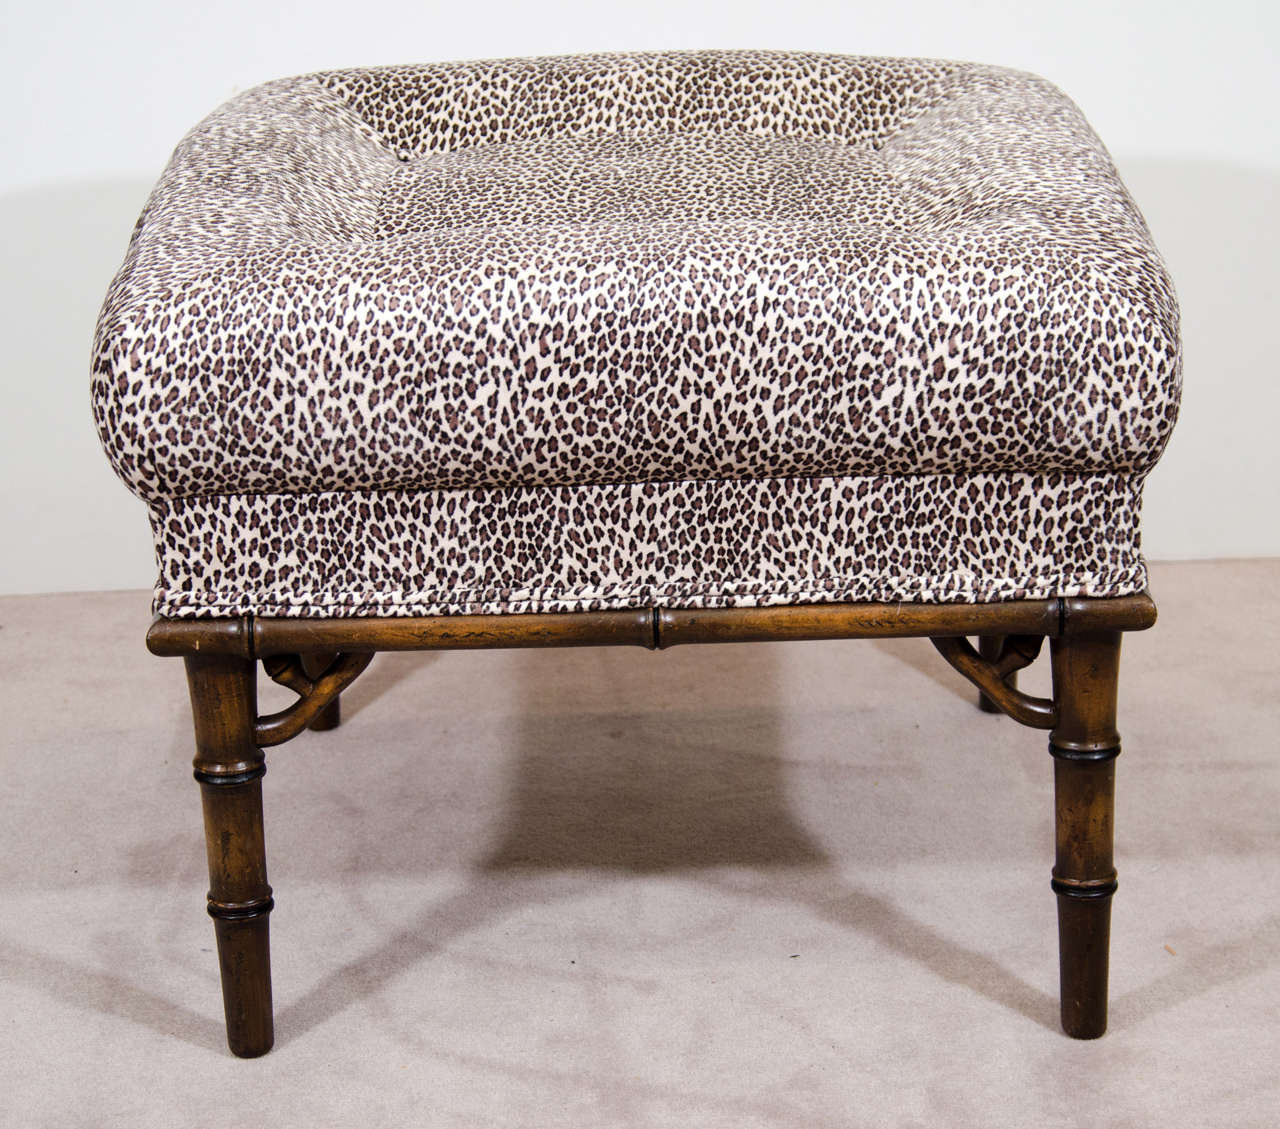 A pair of vintage ottomans or benches with faux bamboo legs and cushions that have been recently reupholstered in ocelot or leopard print ultra-suede.

Reduced from $2,250